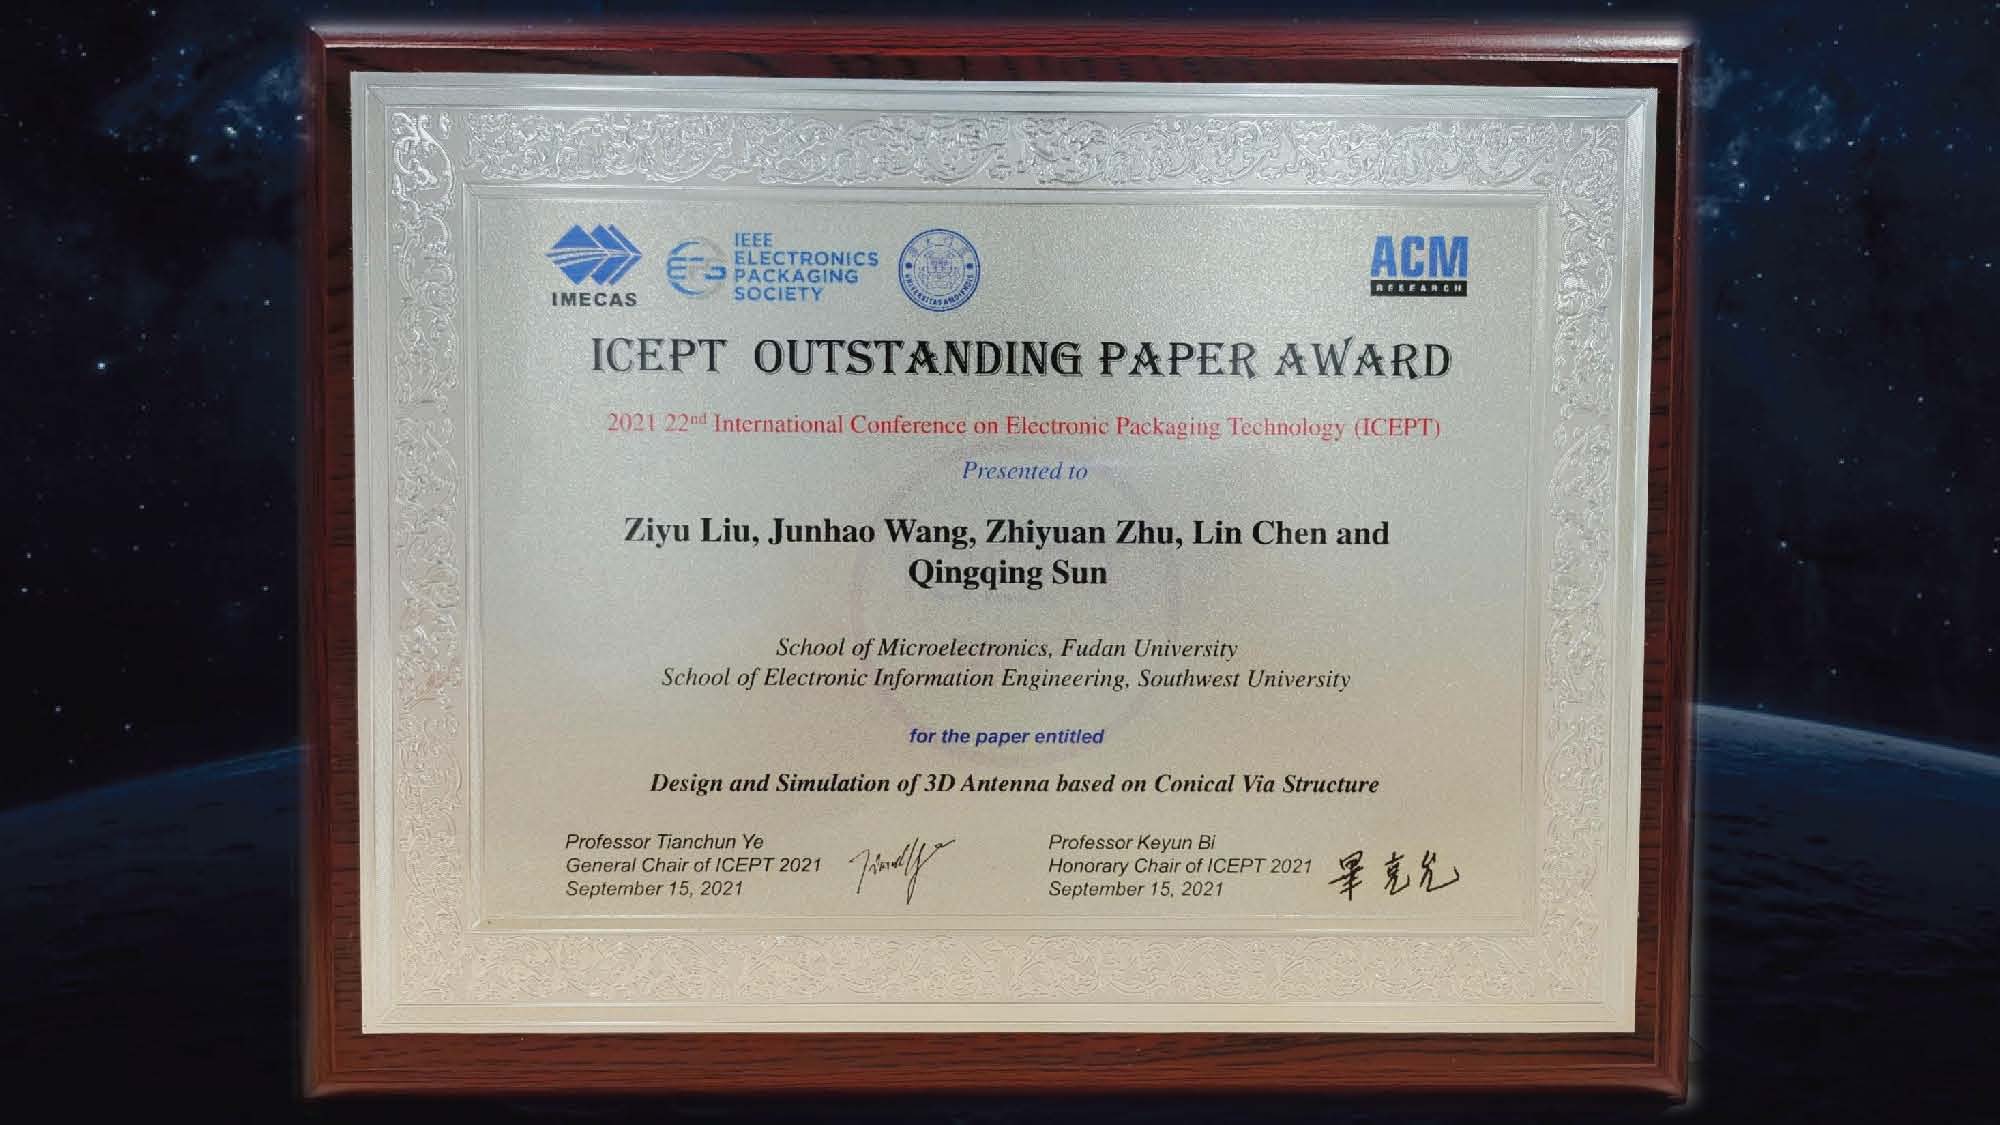 ICEPT OUTSTANDING PAPER AWARD